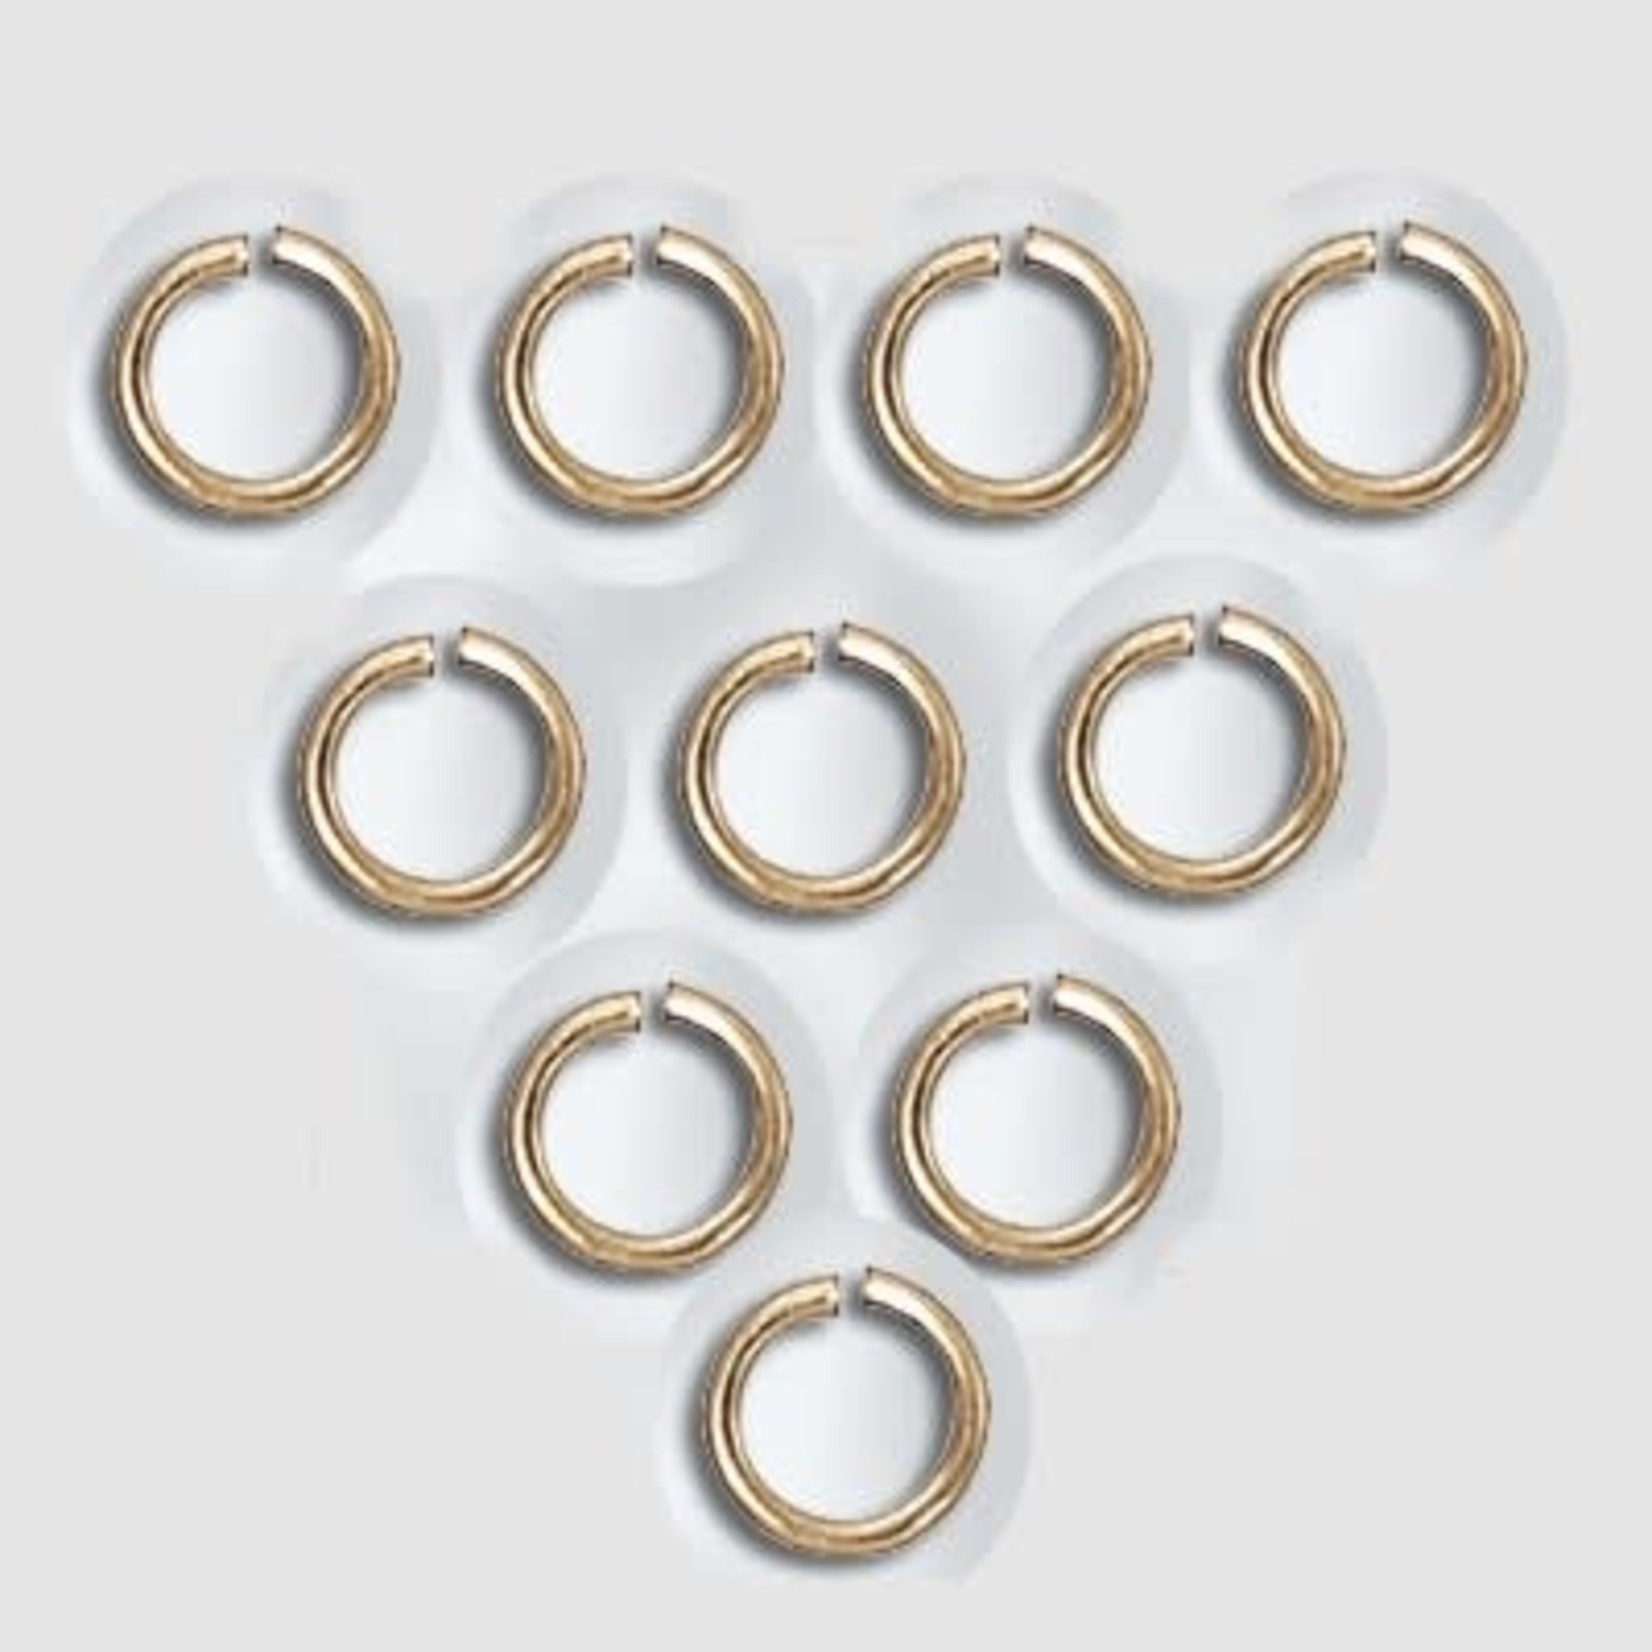 Gold Filled 5mm 20ga Open Jump Ring - 10 Pieces